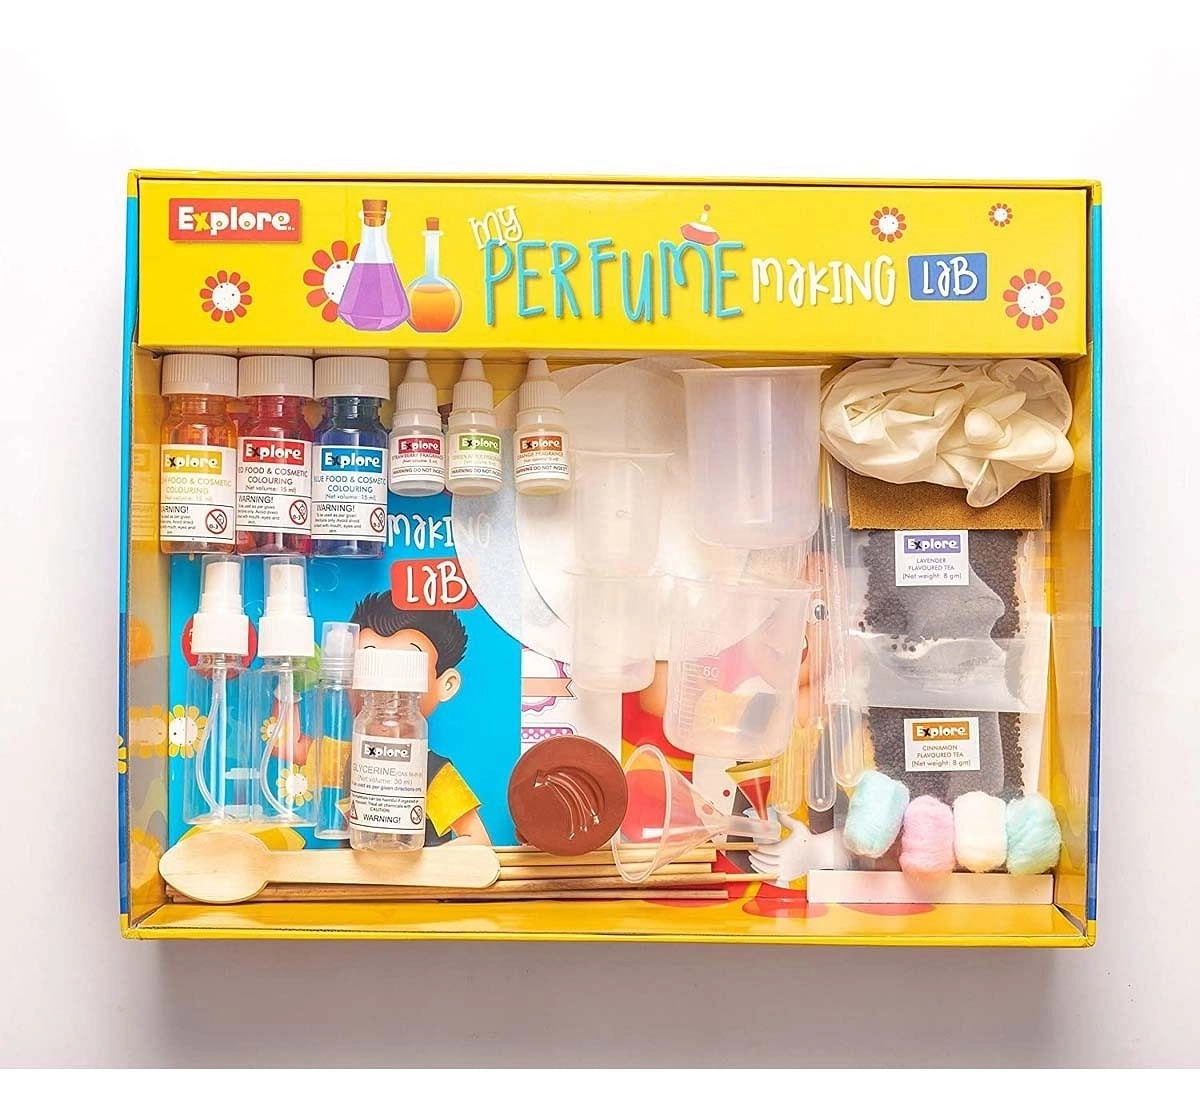 Explore - My Perfume Making Lab Science Kits for Kids Age 6Y+